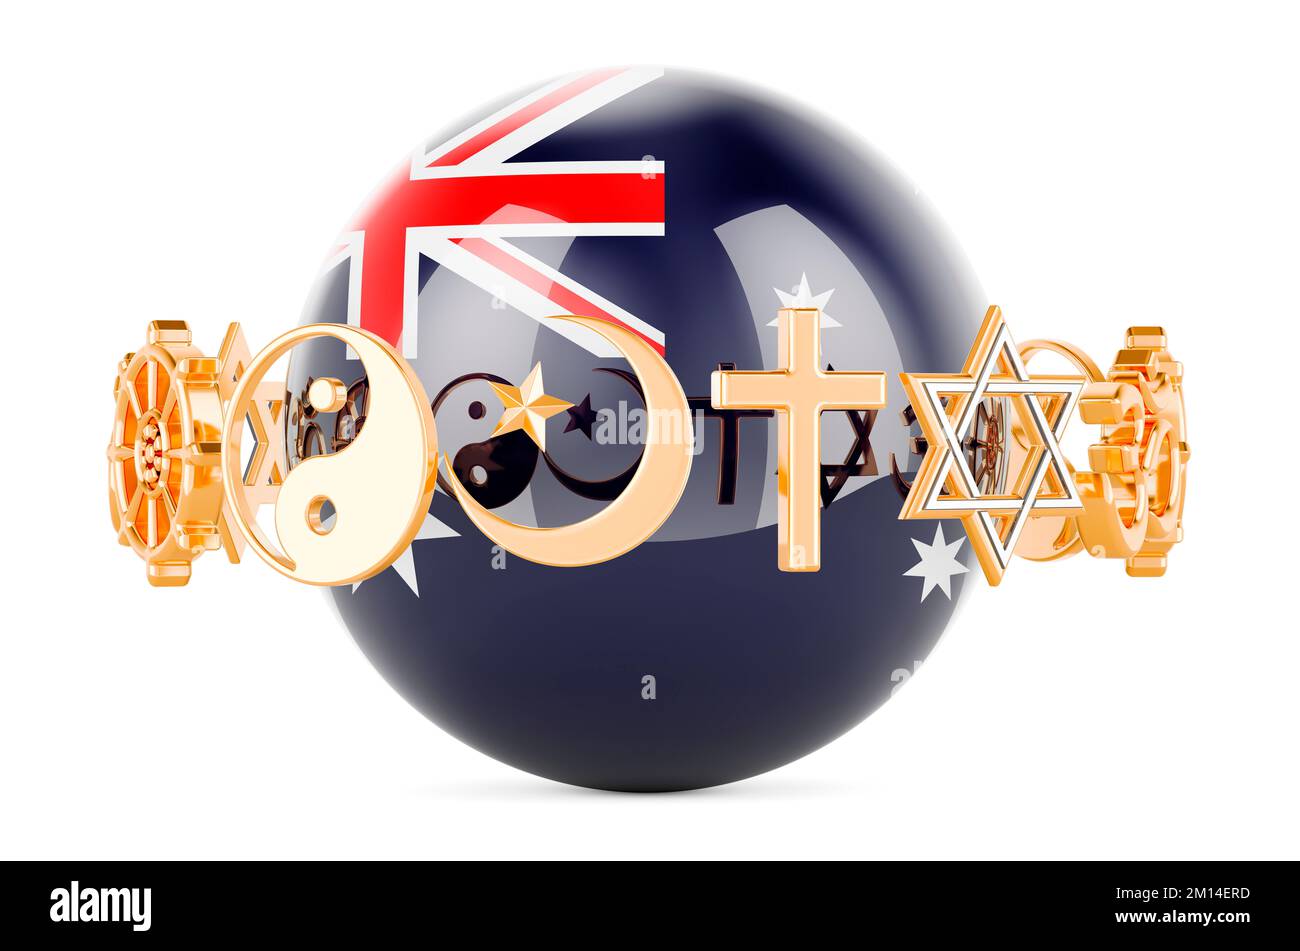 Australian flag painted on sphere with religions symbols around, 3D rendering isolated on white background Stock Photo